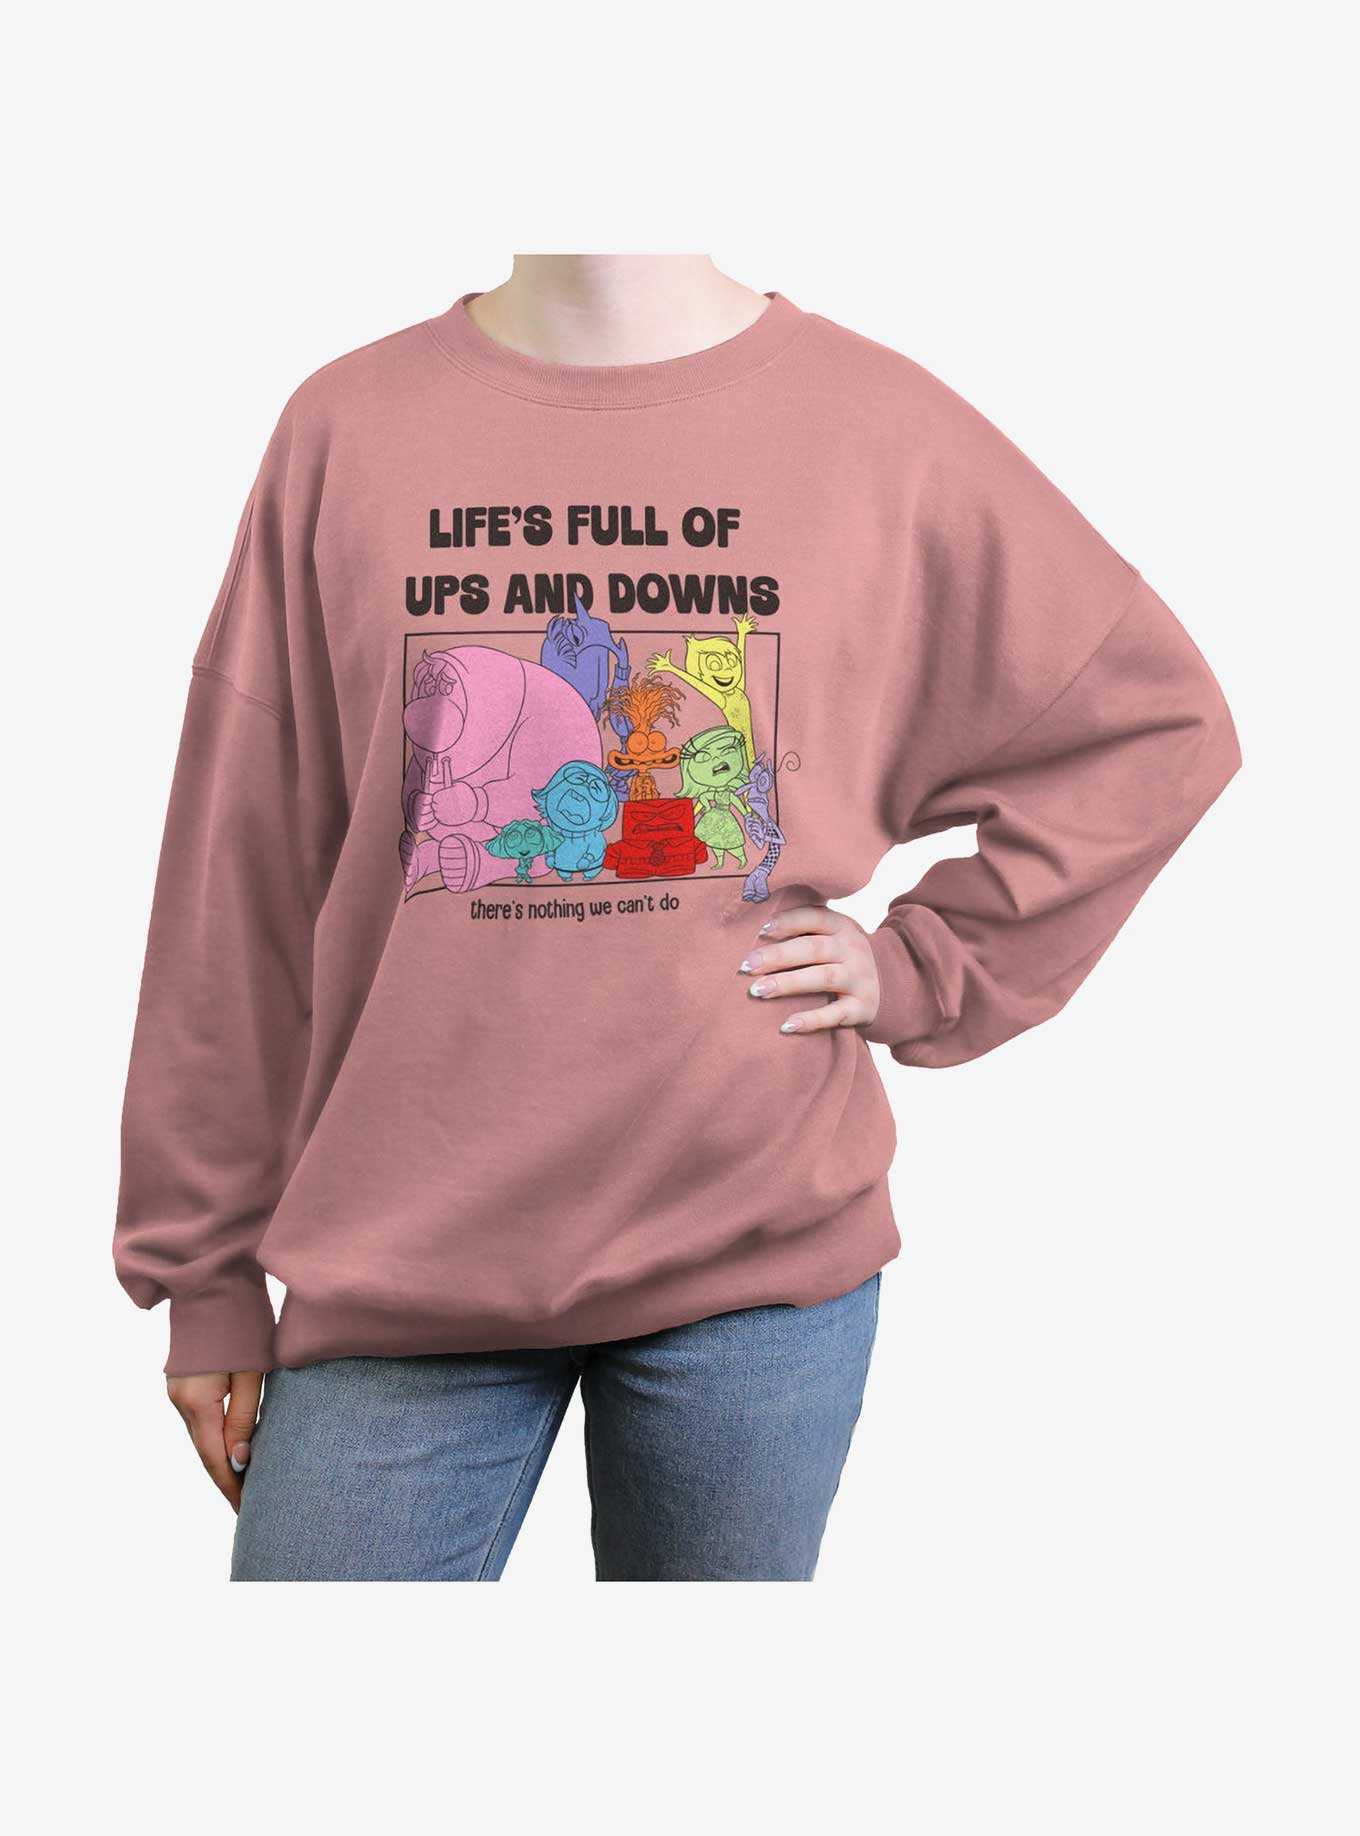 Disney Pixar Inside Out 2 Life's Full Of Ups And Downs Womens Oversized Sweatshirt, , hi-res